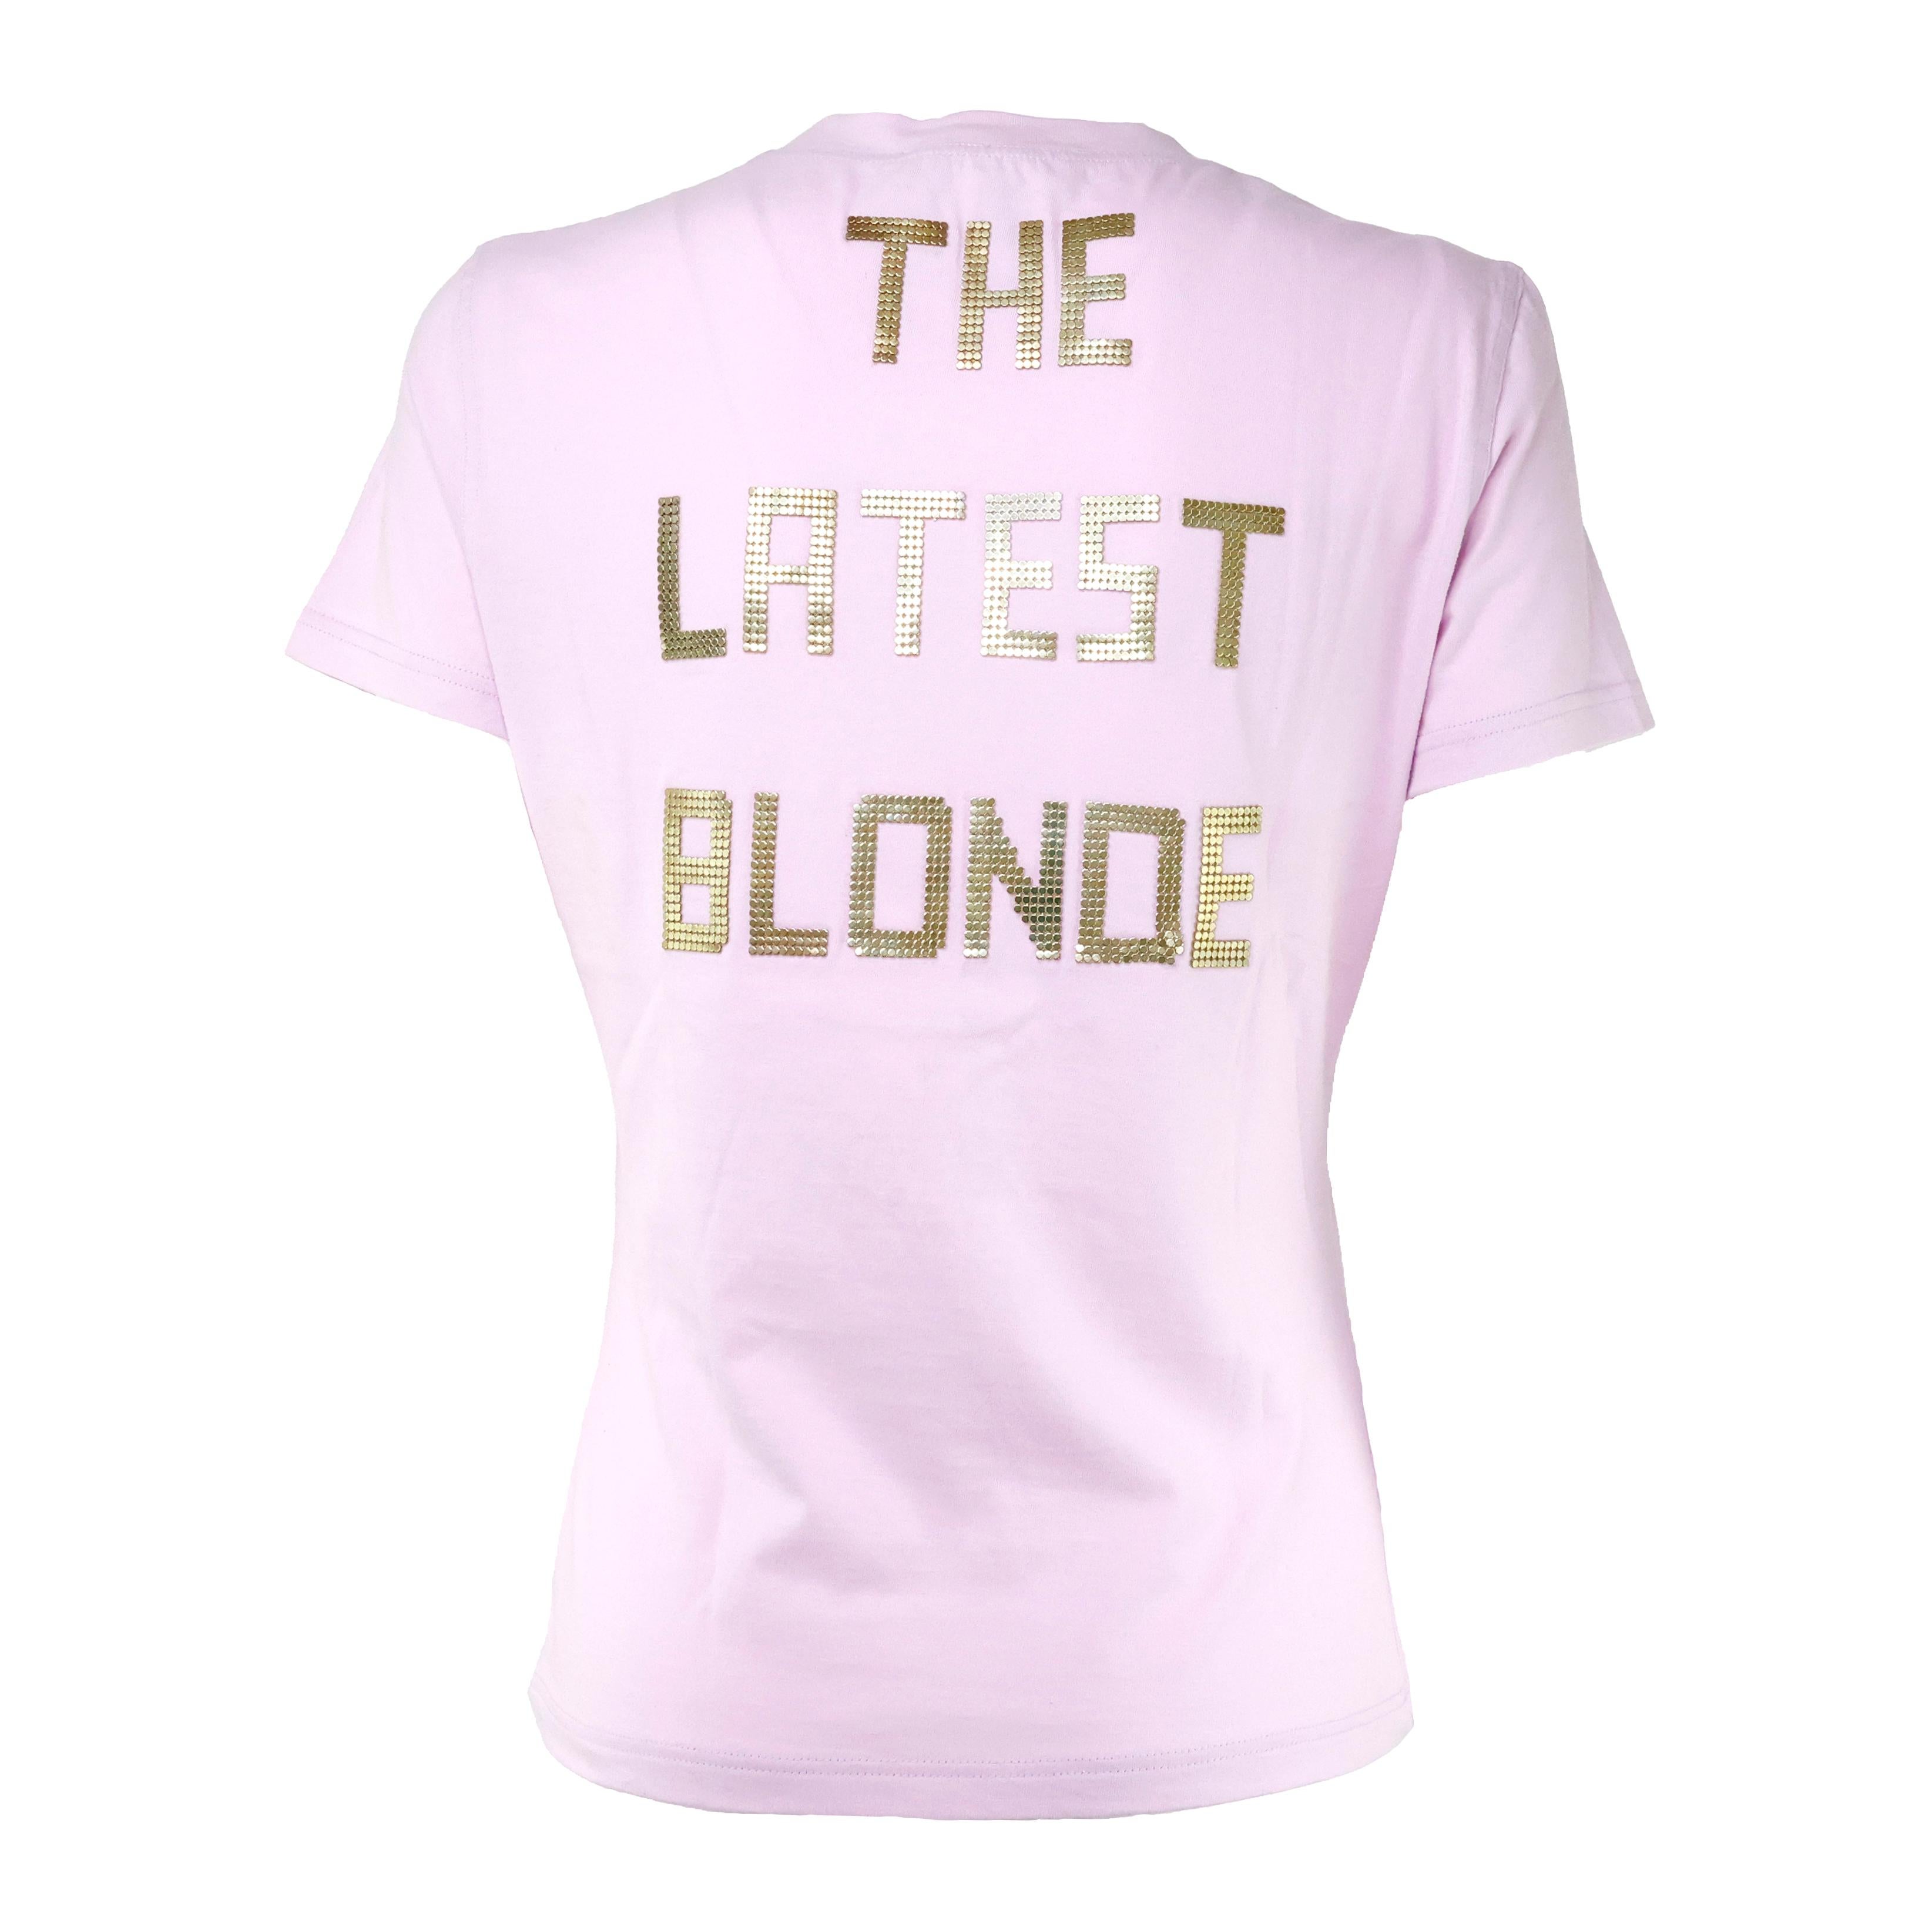 Christian Dior by John Galliano J'adore Dior, The Latest Blonde T-shirt In Excellent Condition For Sale In Bressanone, IT